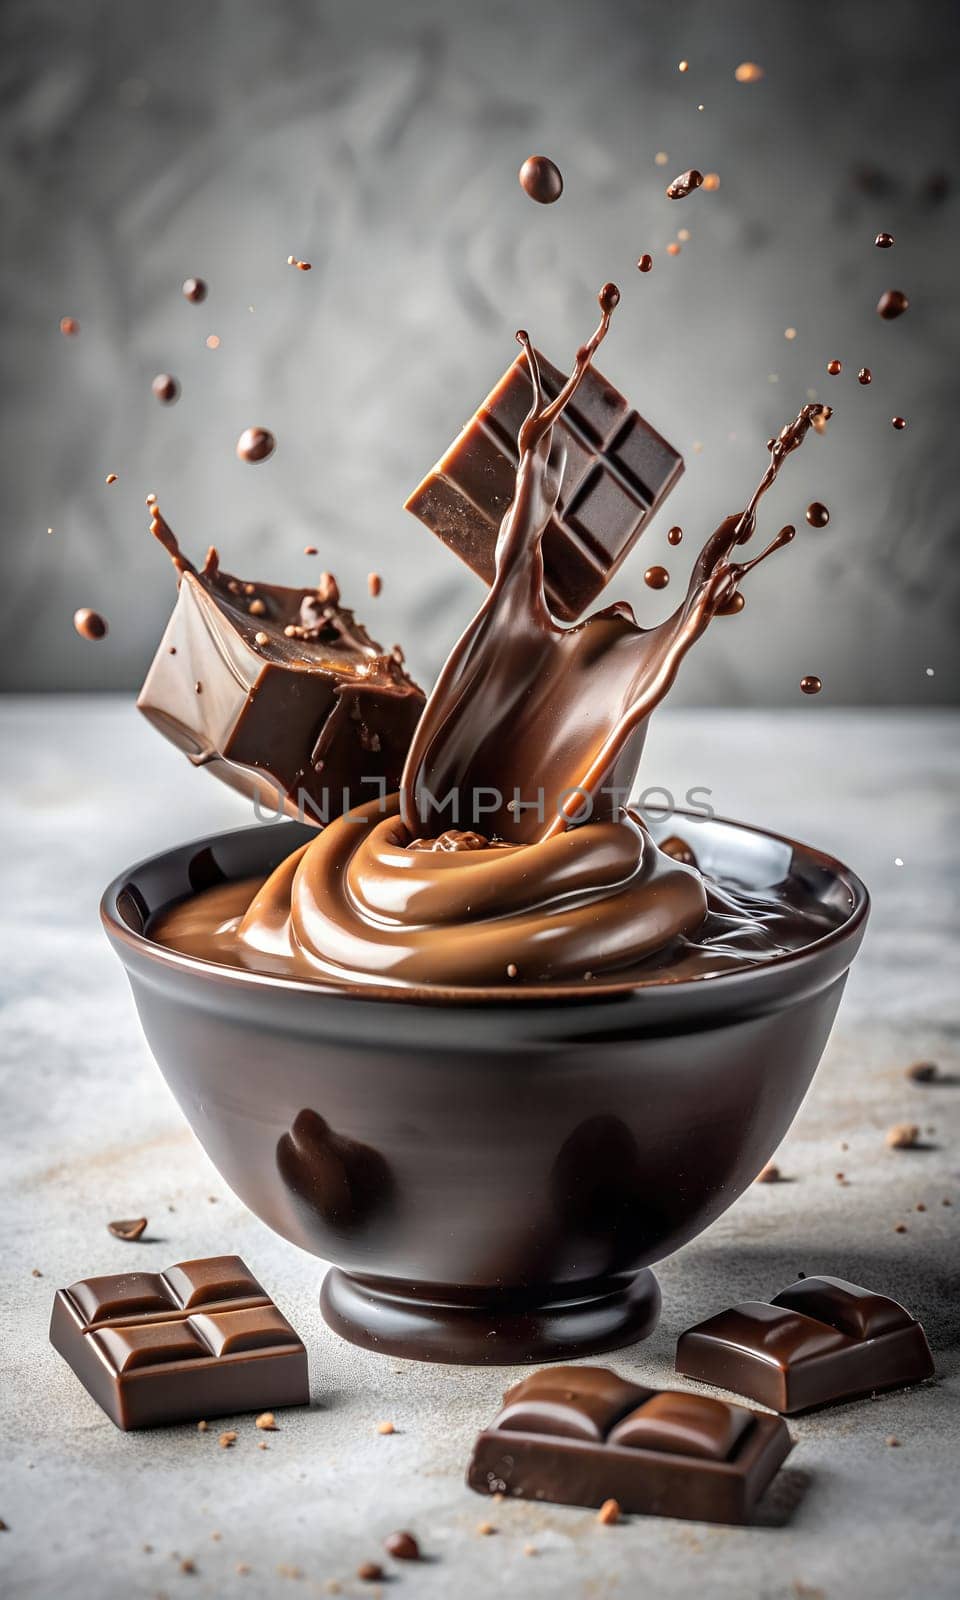 Chocolate pieces falling on bowl of melted chocolate. Splash 3D. by VeroDibe